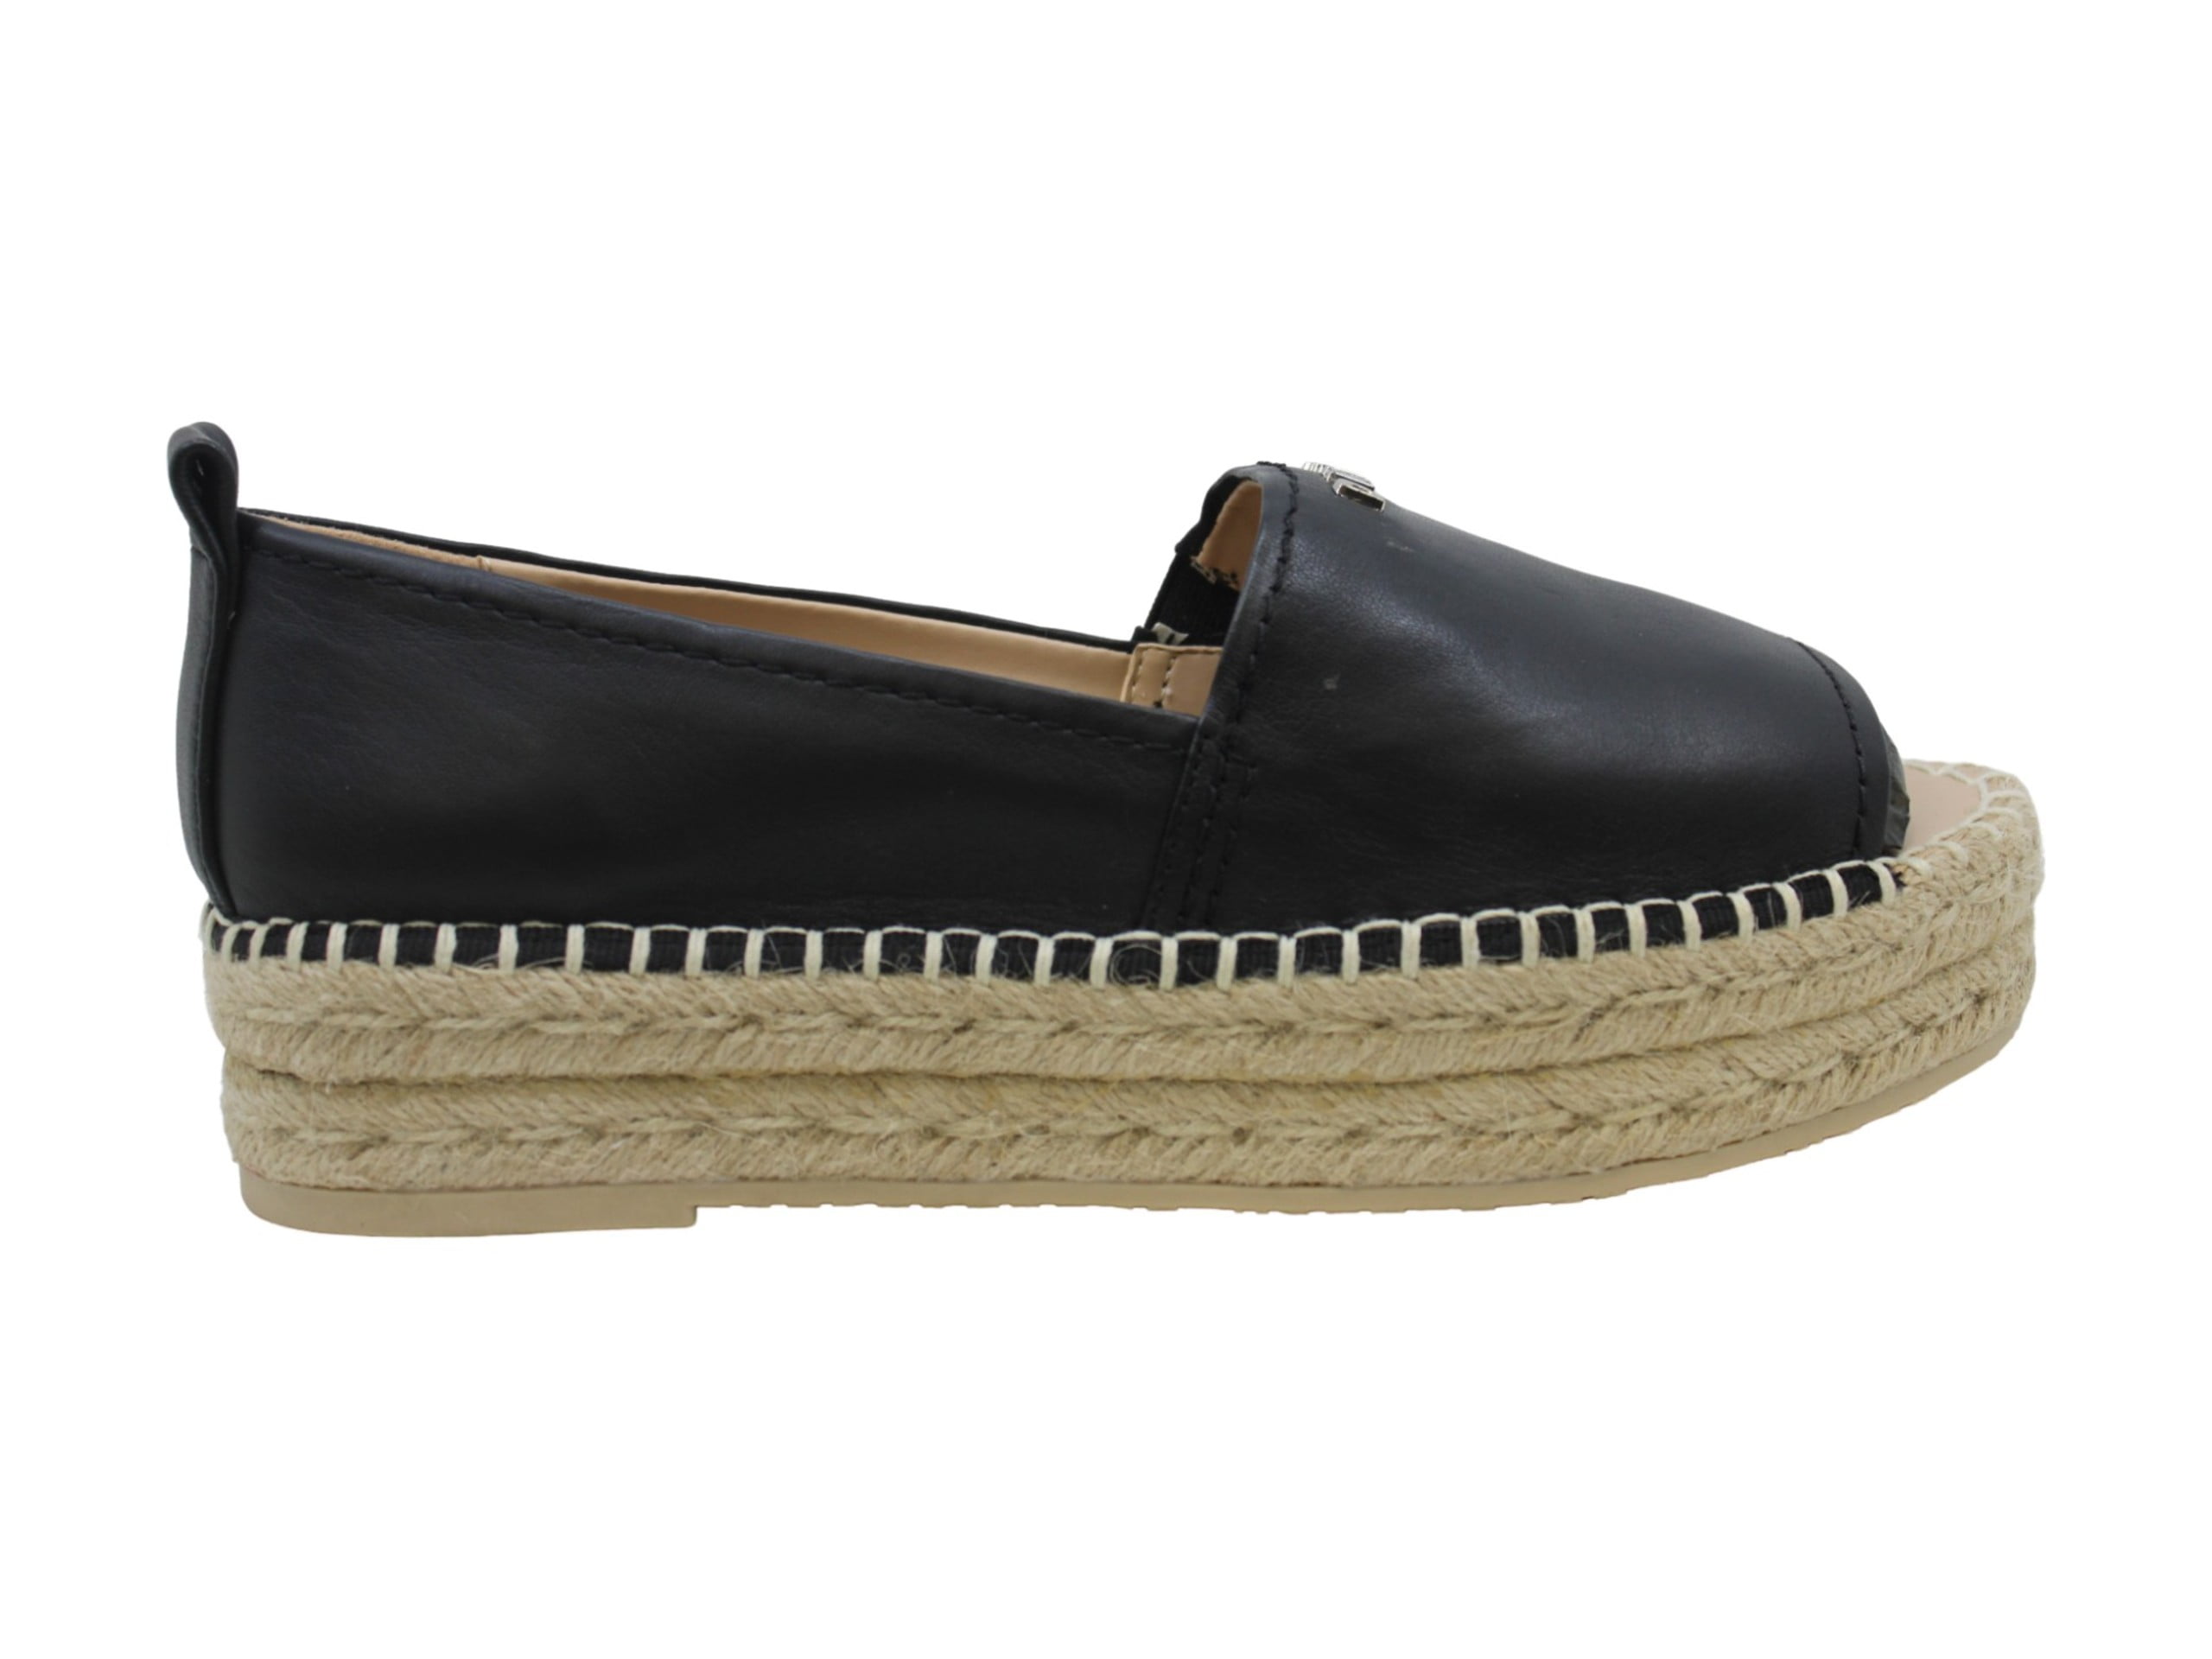 DKNY Womens Mer Leather Open Toe Casual Espadrille Sandals, Black, Size ...